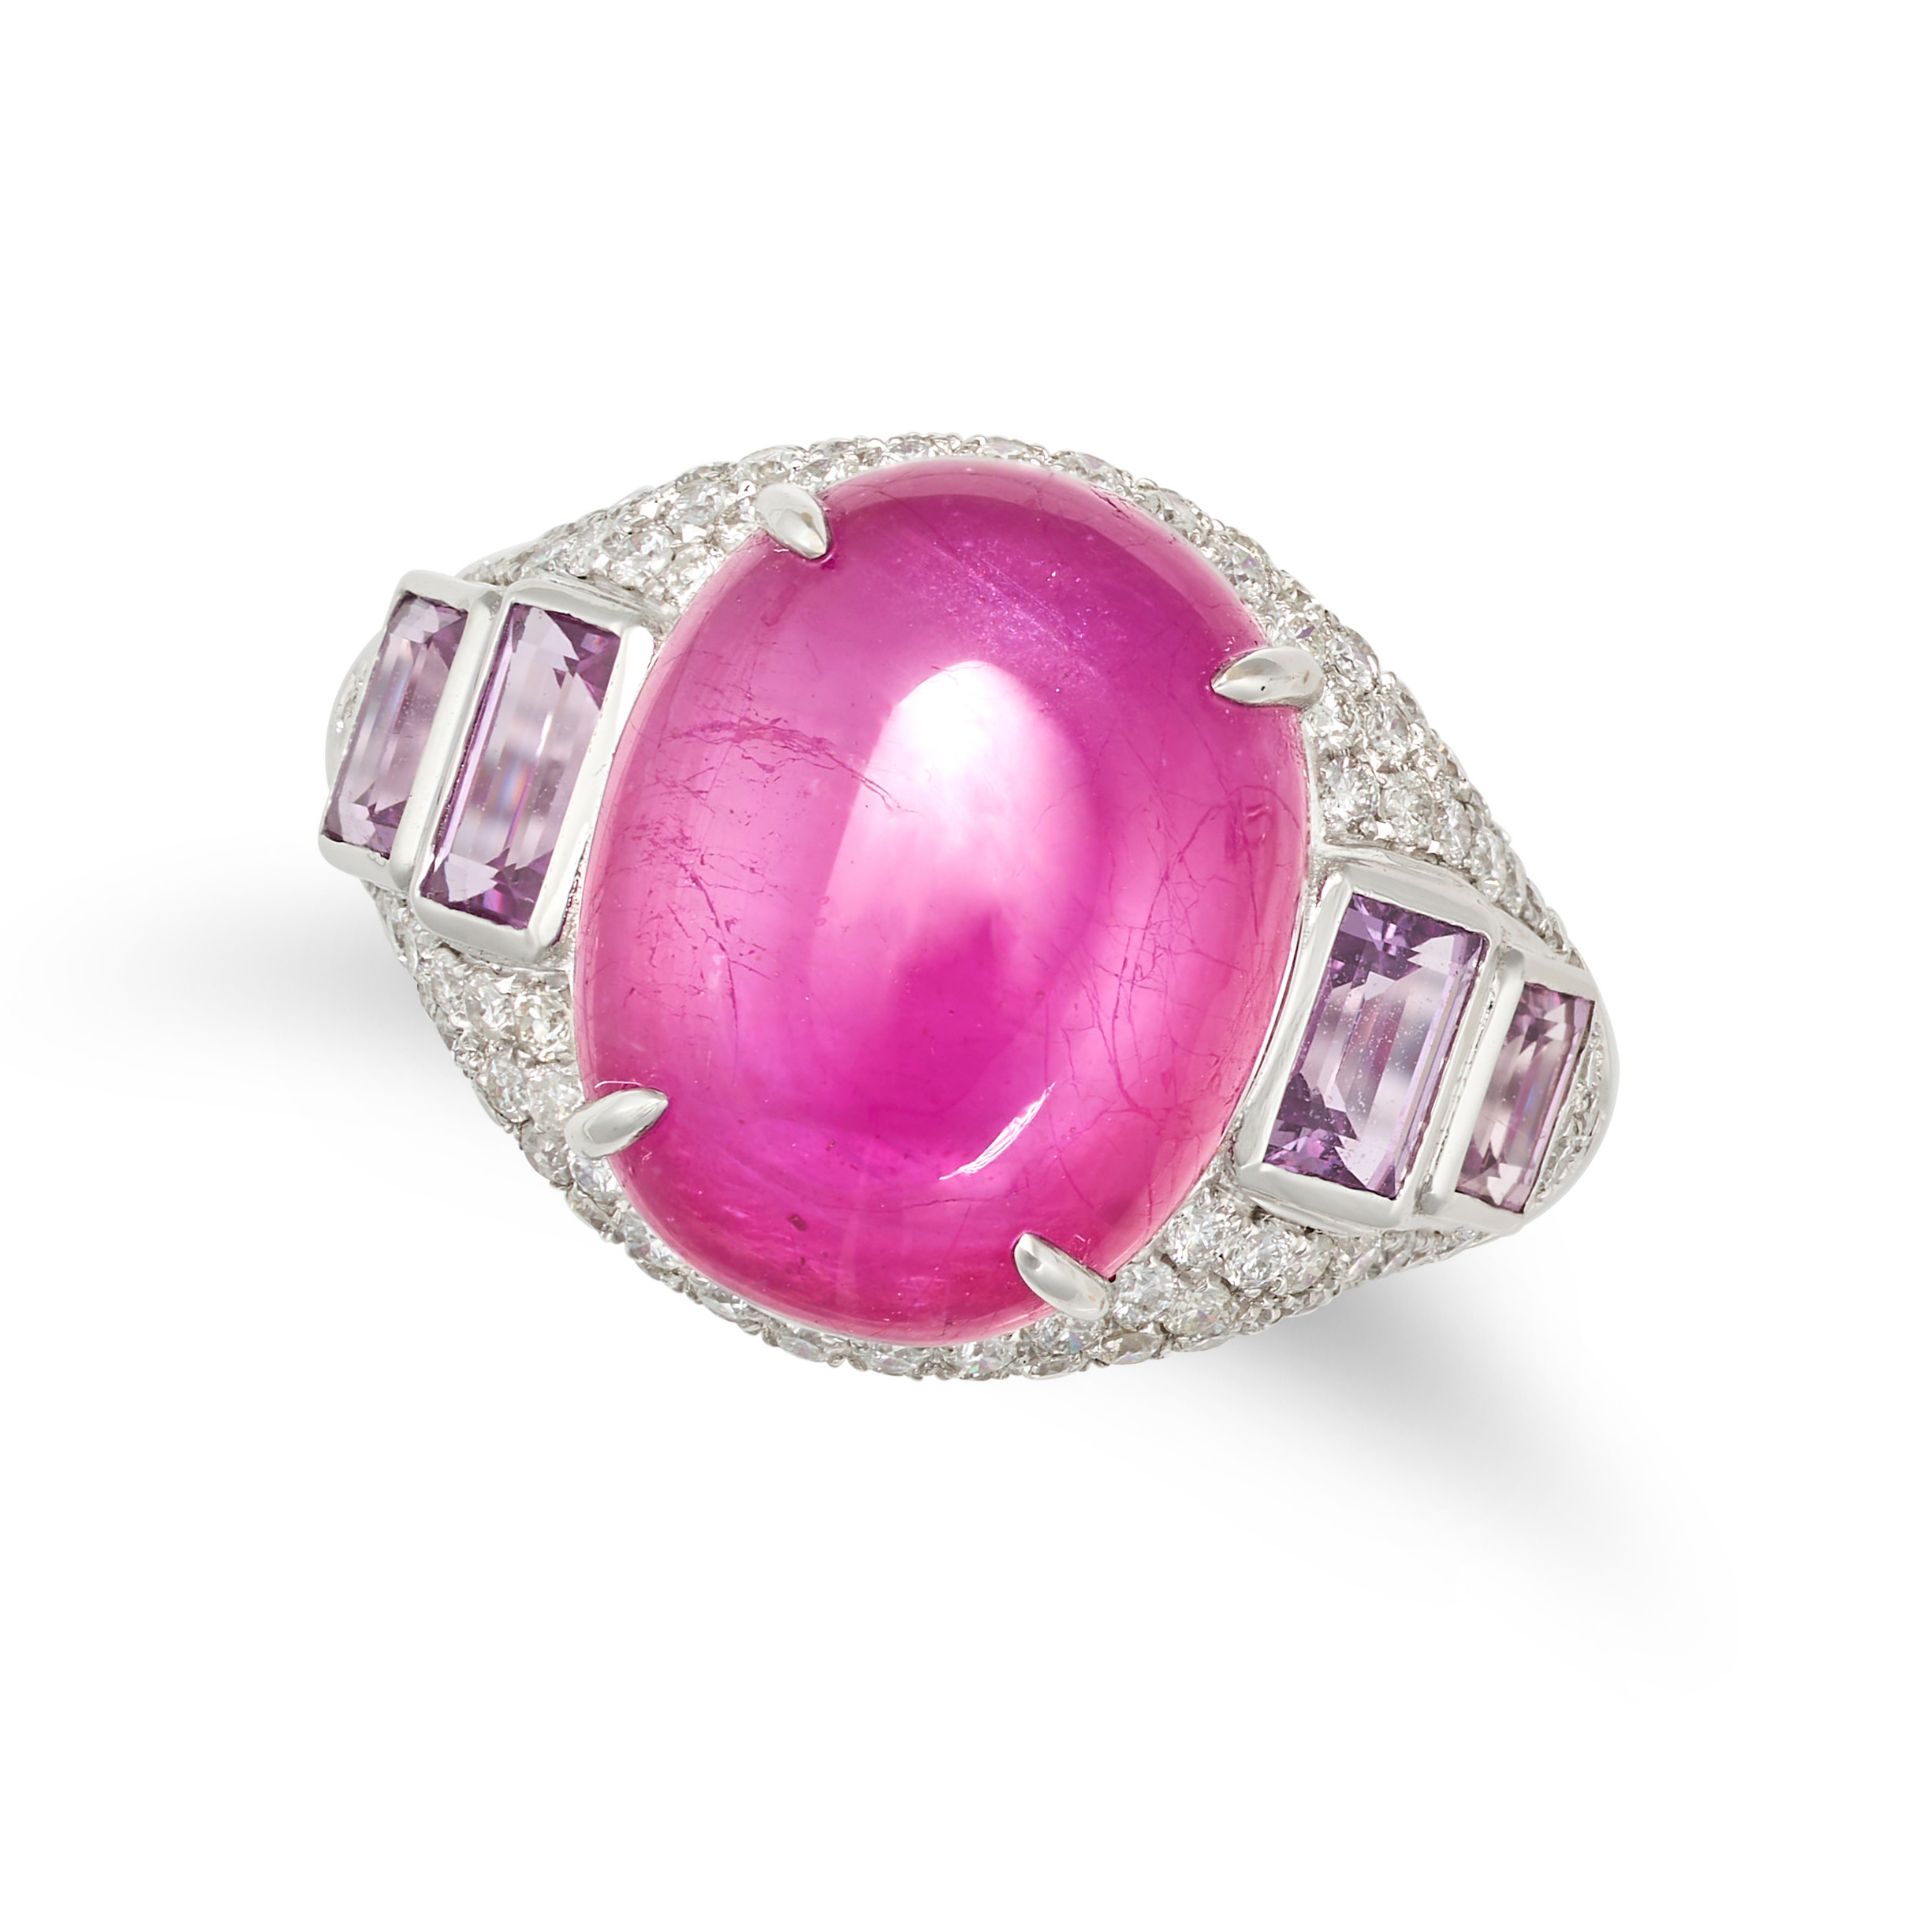 A RUBY, AMETHYST AND DIAMOND RING in 18ct white gold, set with an oval cabochon ruby of 10.80 car...